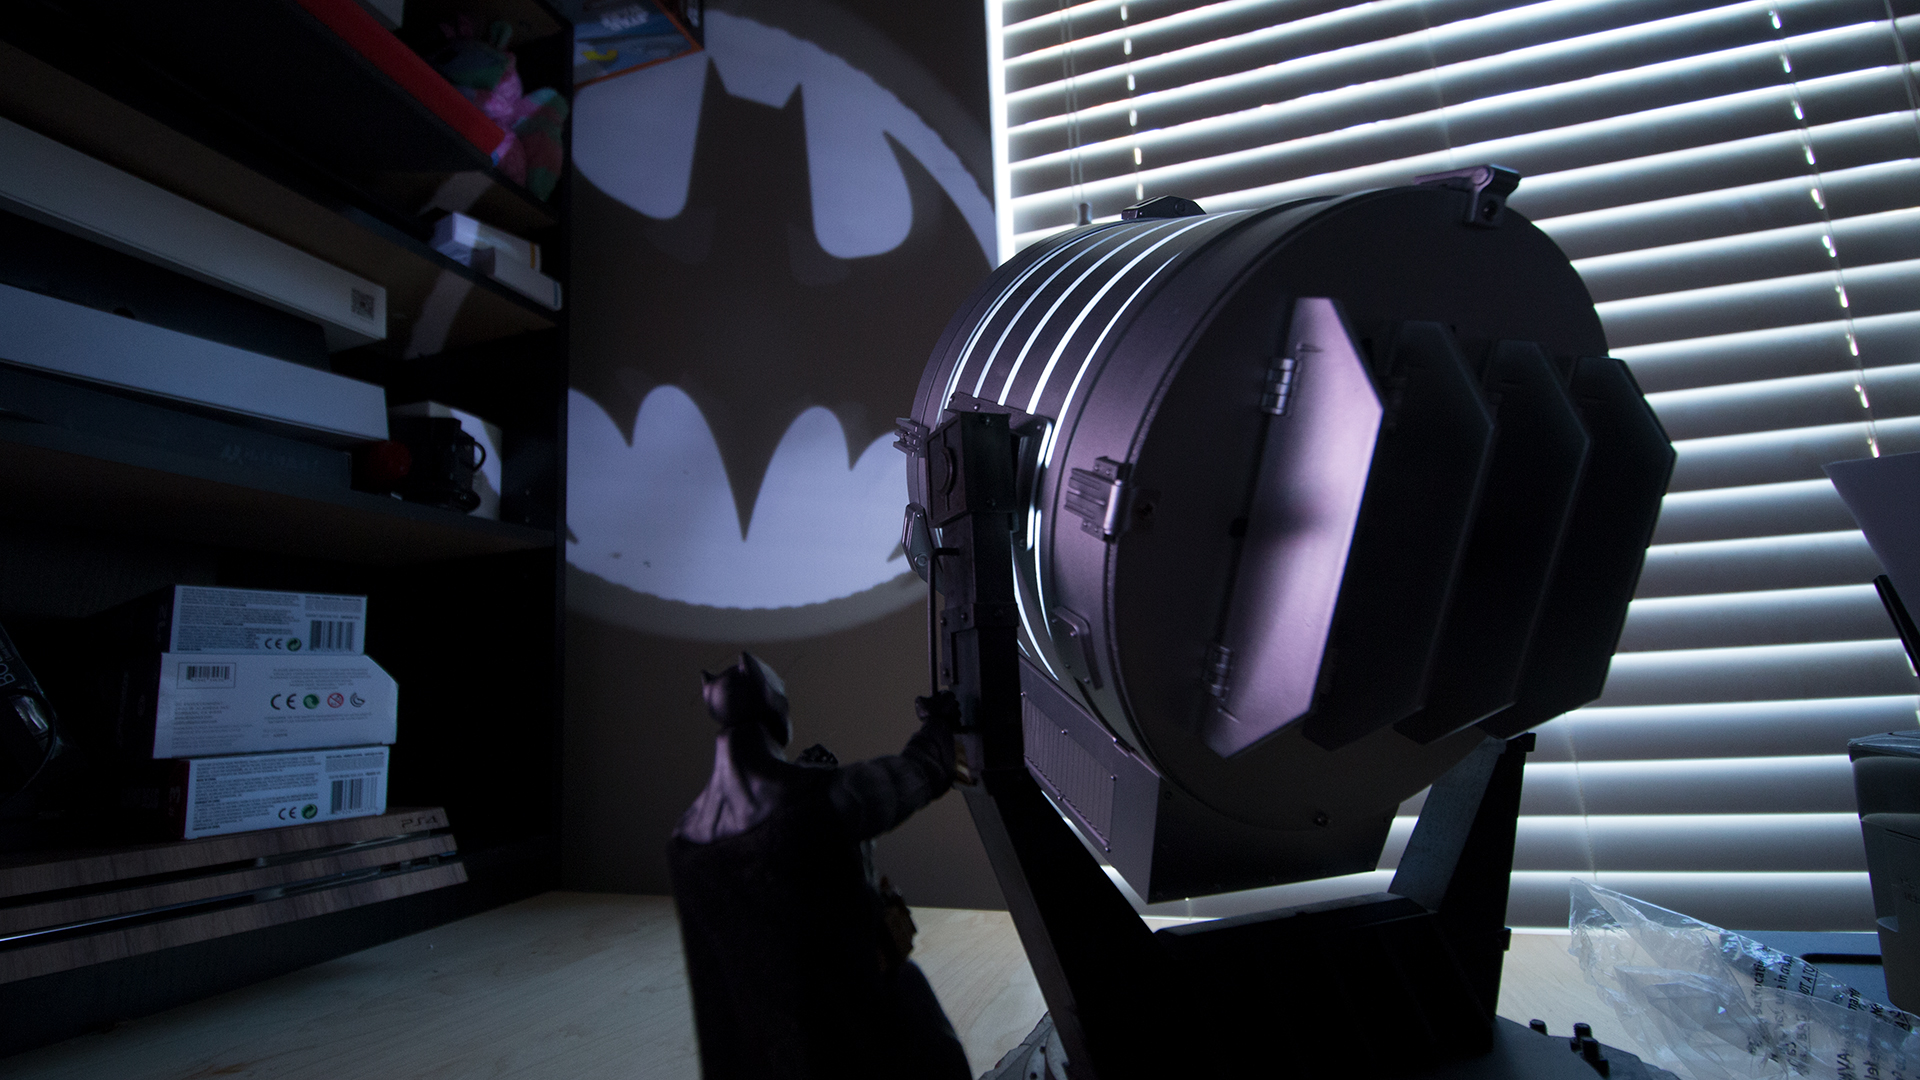 For Just $300 You Can Own A Tiny Bat-Signal (Batman Not Included)